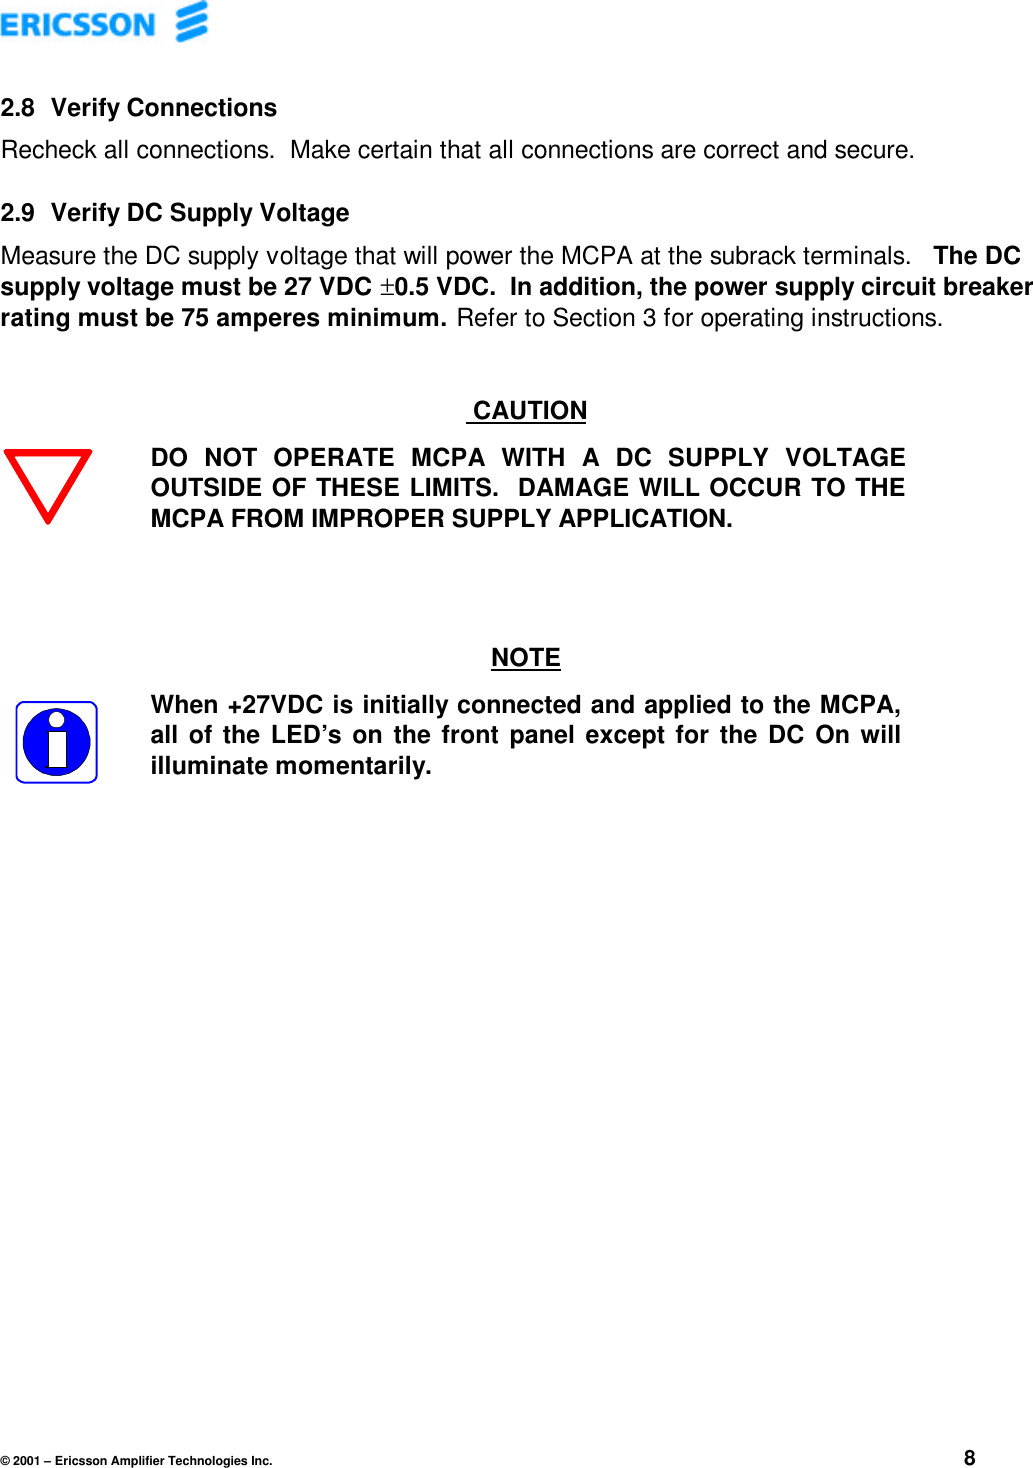 © 2001 – Ericsson Amplifier Technologies Inc. 82.8  Verify ConnectionsRecheck all connections.  Make certain that all connections are correct and secure.2.9  Verify DC Supply VoltageMeasure the DC supply voltage that will power the MCPA at the subrack terminals.   The DCsupply voltage must be 27 VDC ±0.5 VDC.  In addition, the power supply circuit breakerrating must be 75 amperes minimum.  Refer to Section 3 for operating instructions. CAUTIONDO NOT OPERATE MCPA WITH A DC SUPPLY VOLTAGEOUTSIDE OF THESE LIMITS.  DAMAGE WILL OCCUR TO THEMCPA FROM IMPROPER SUPPLY APPLICATION.NOTEWhen +27VDC is initially connected and applied to the MCPA,all of the LED’s on the front panel except for the DC On willilluminate momentarily.